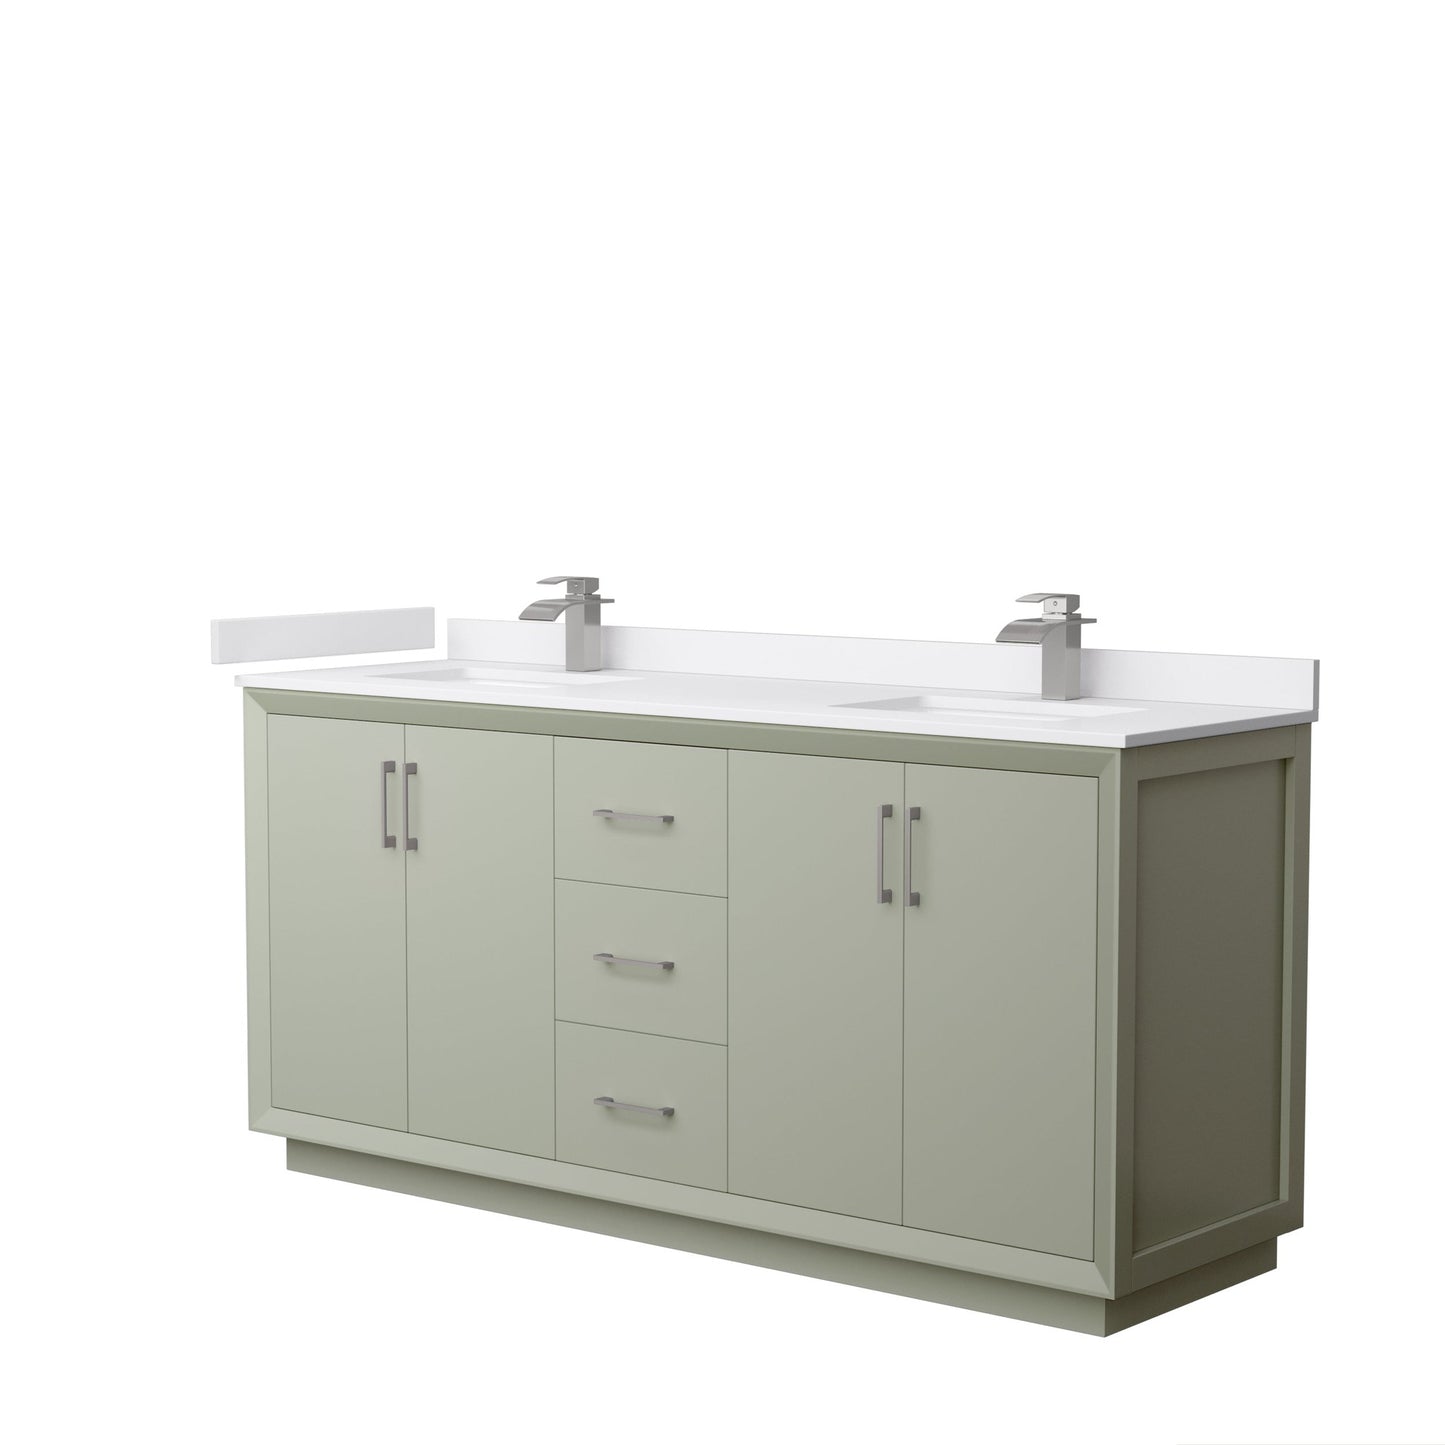 Wyndham Collection Strada 72" Double Bathroom Vanity in Light Green, White Cultured Marble Countertop, Undermount Square Sinks, Brushed Nickel Trim